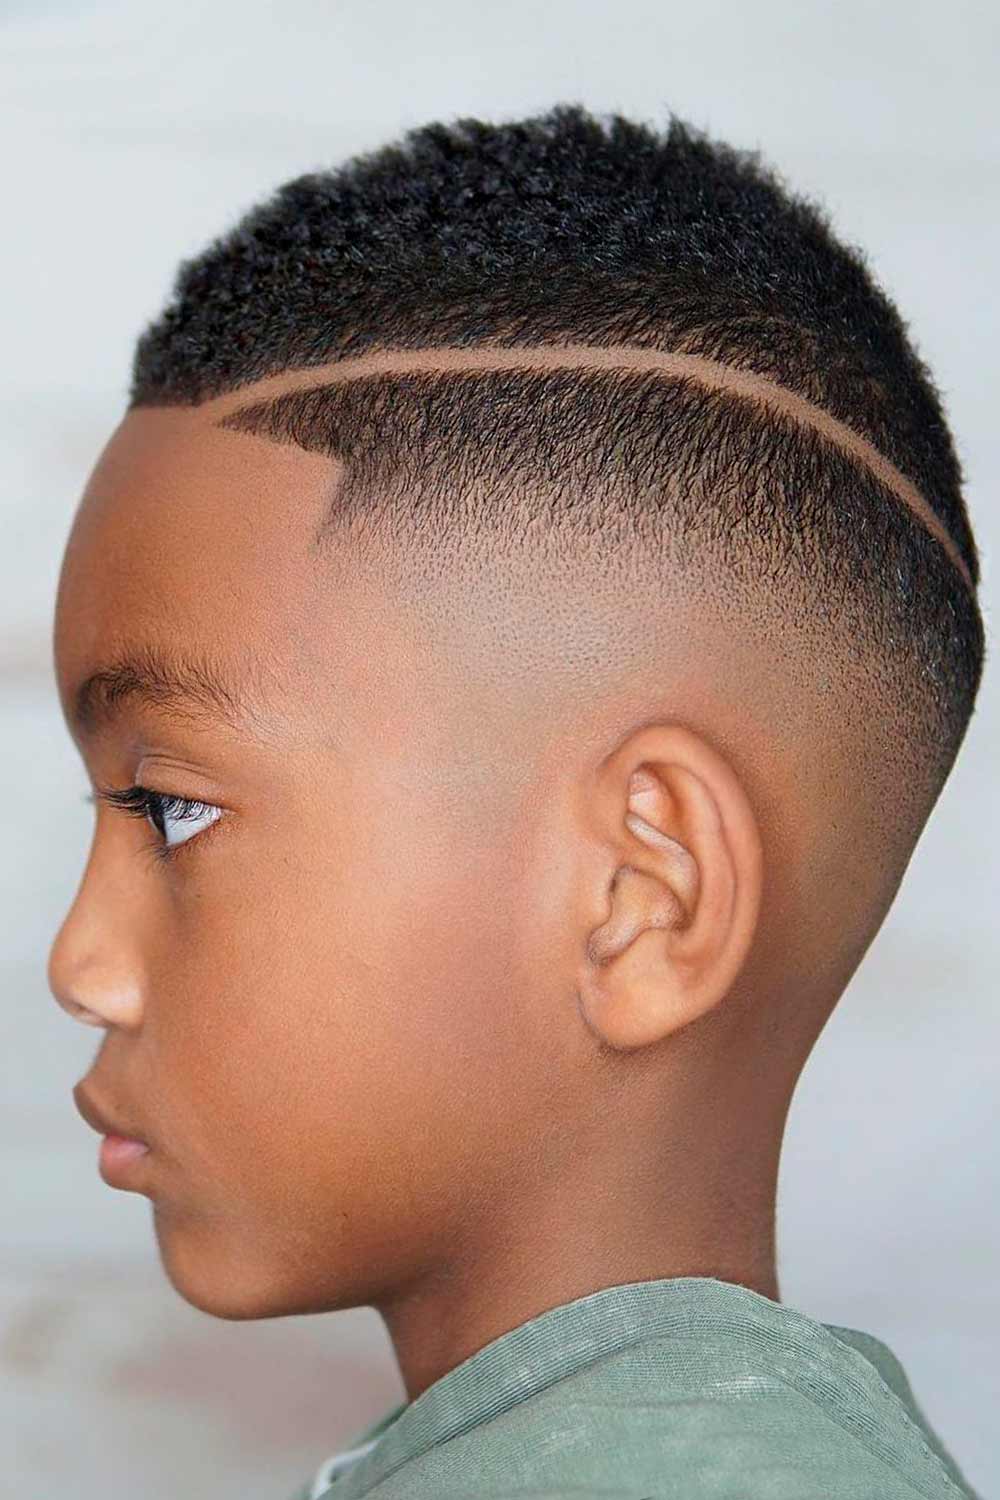 78 Creative Black baby boy haircuts 2021 for Oval Face